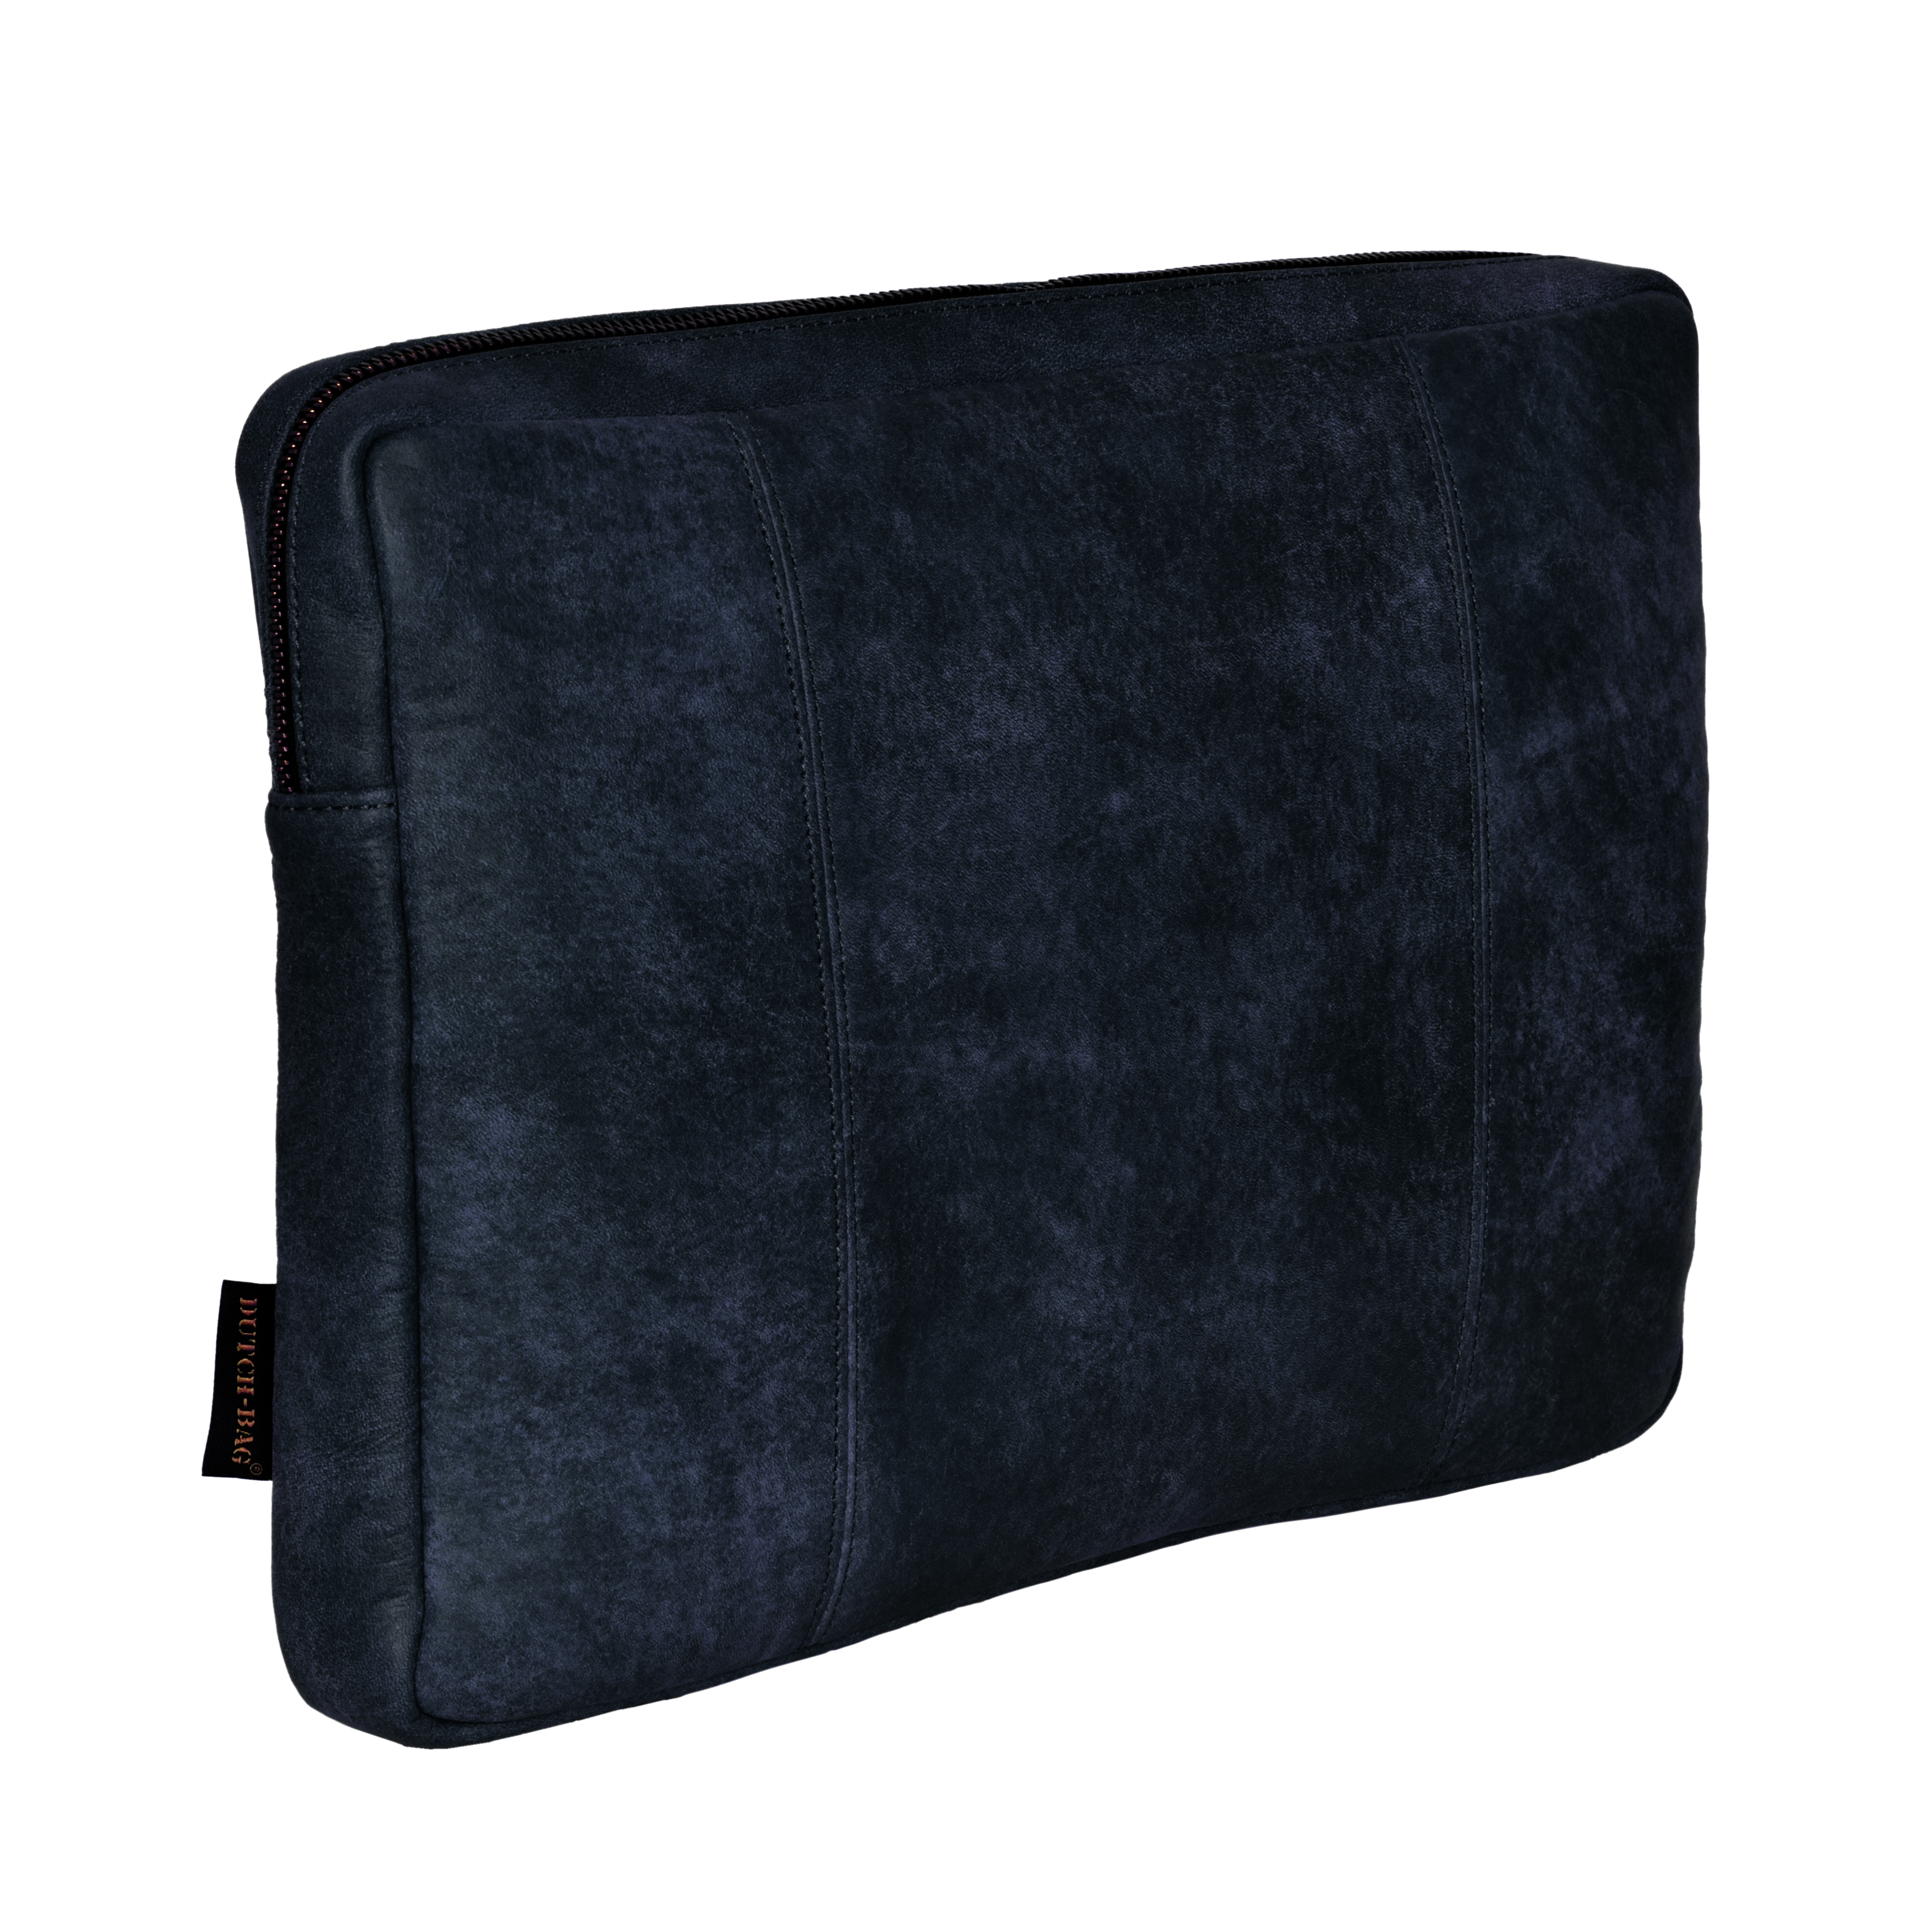 Leather Laptop Sleeve Black The Hague 15 inch